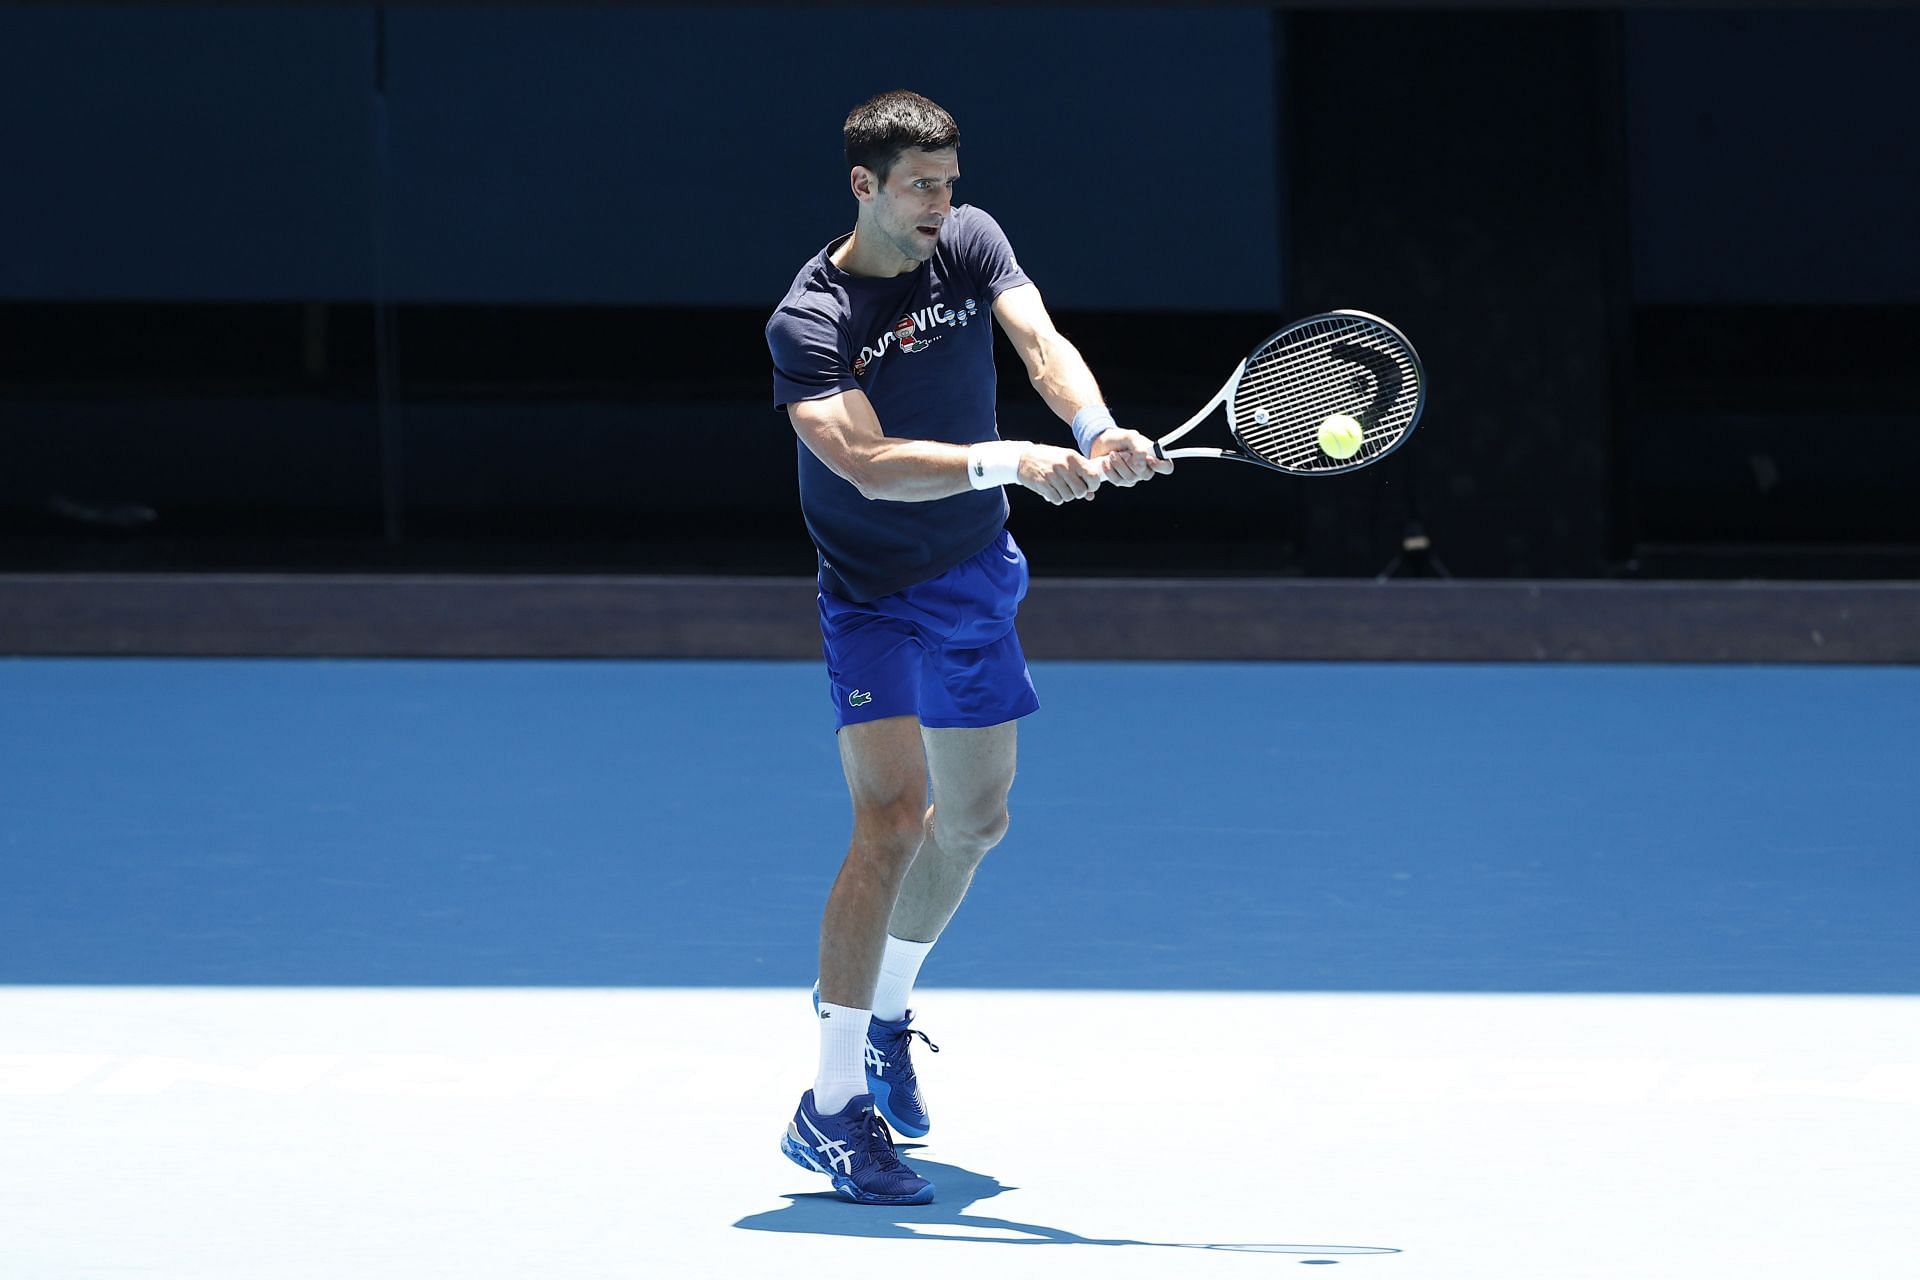 Novak Djokovic has said he will stick to his priciples as far as vaccination is concerned